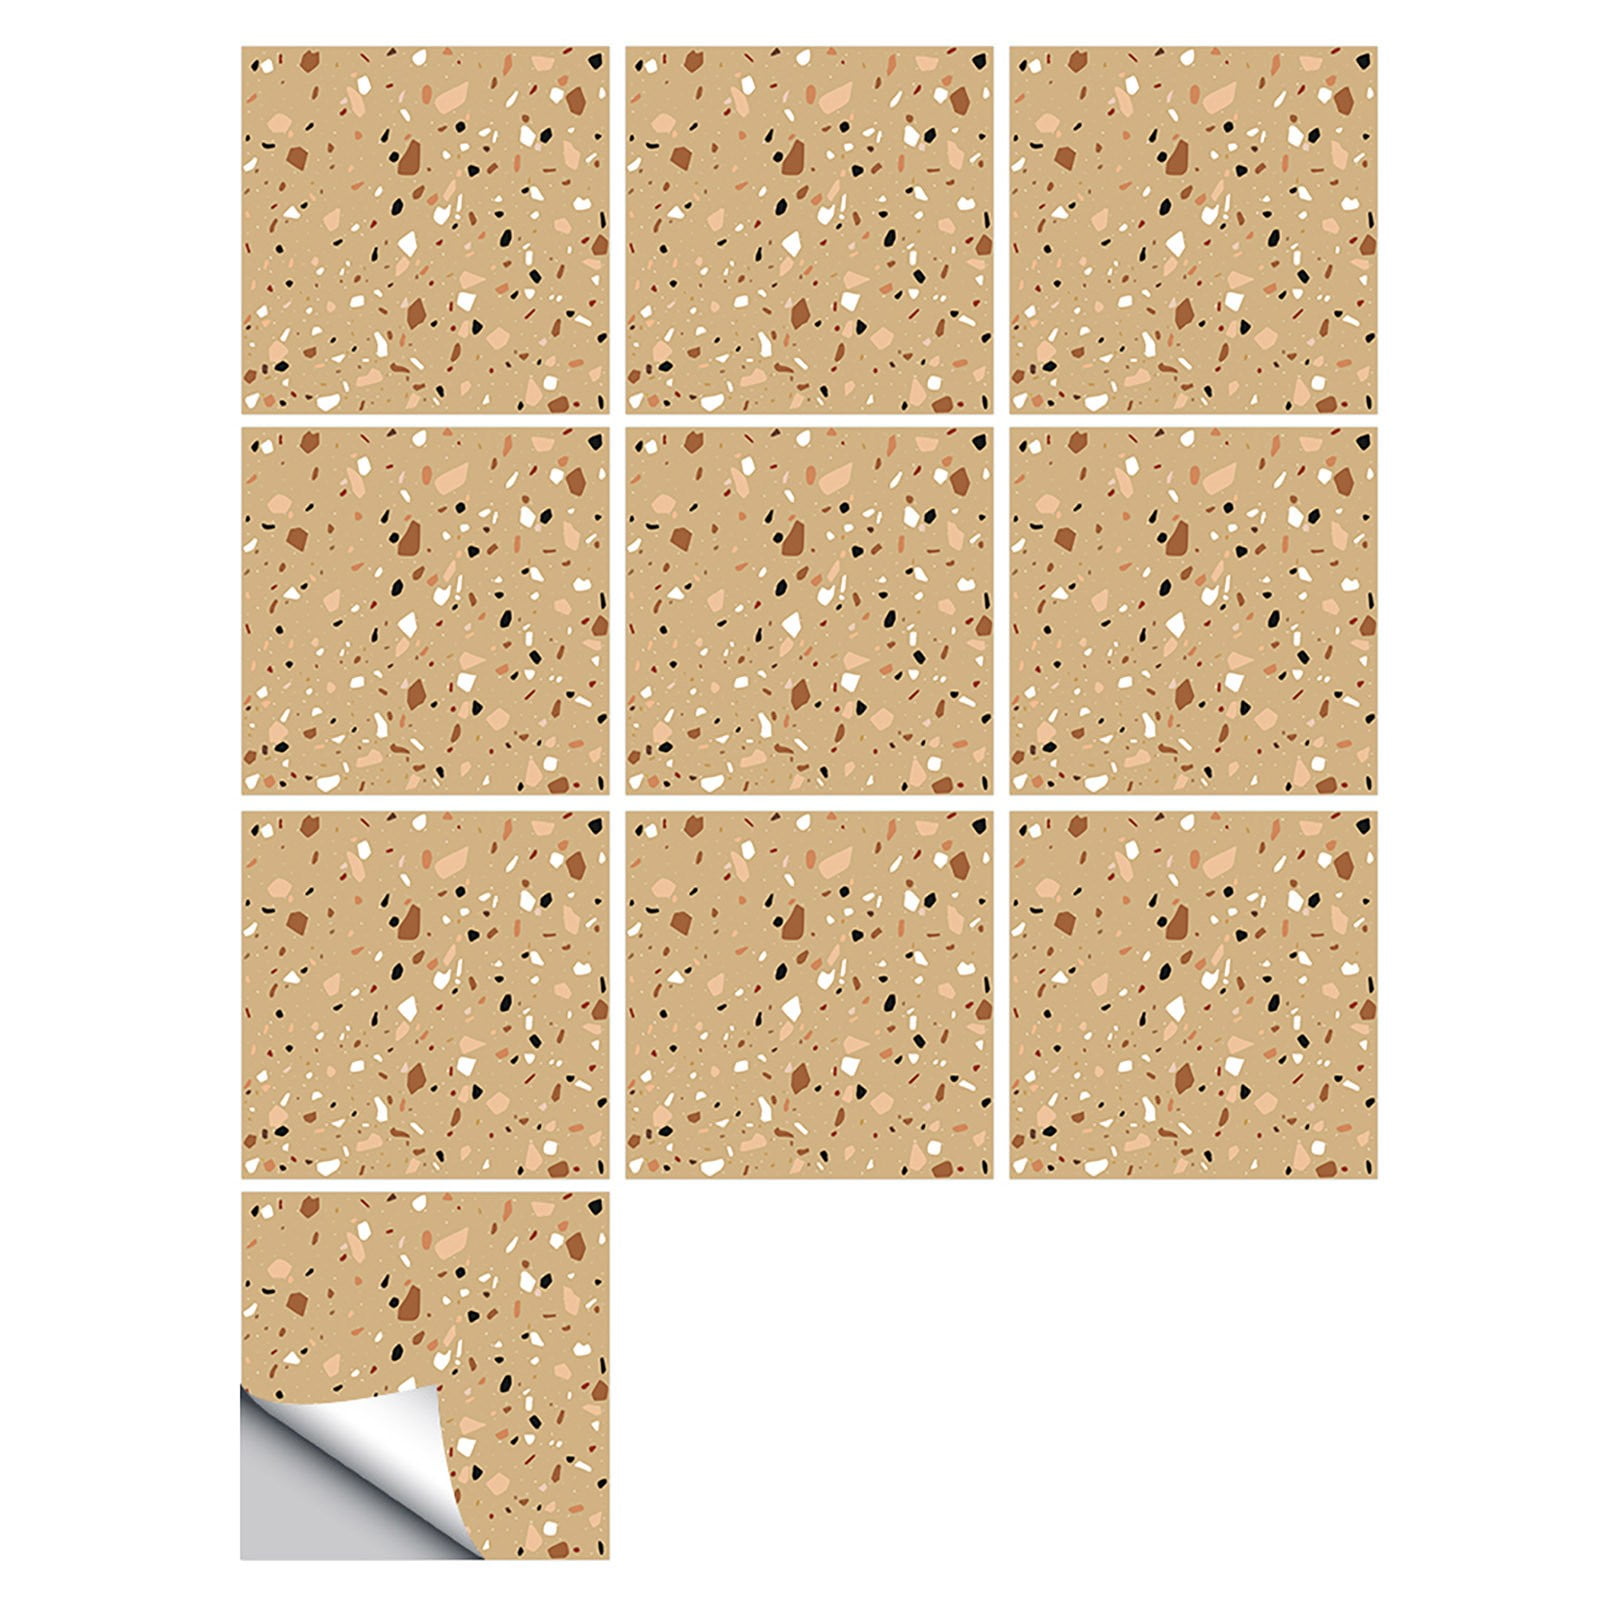 Pianpianzi Sticky Tiles for Walls Bathroom Cute Things for A Room Mirror Squares Ceiling 6pc Peel and Stick Ceramic Tile Paste 3D Lattice Ceramic Tile